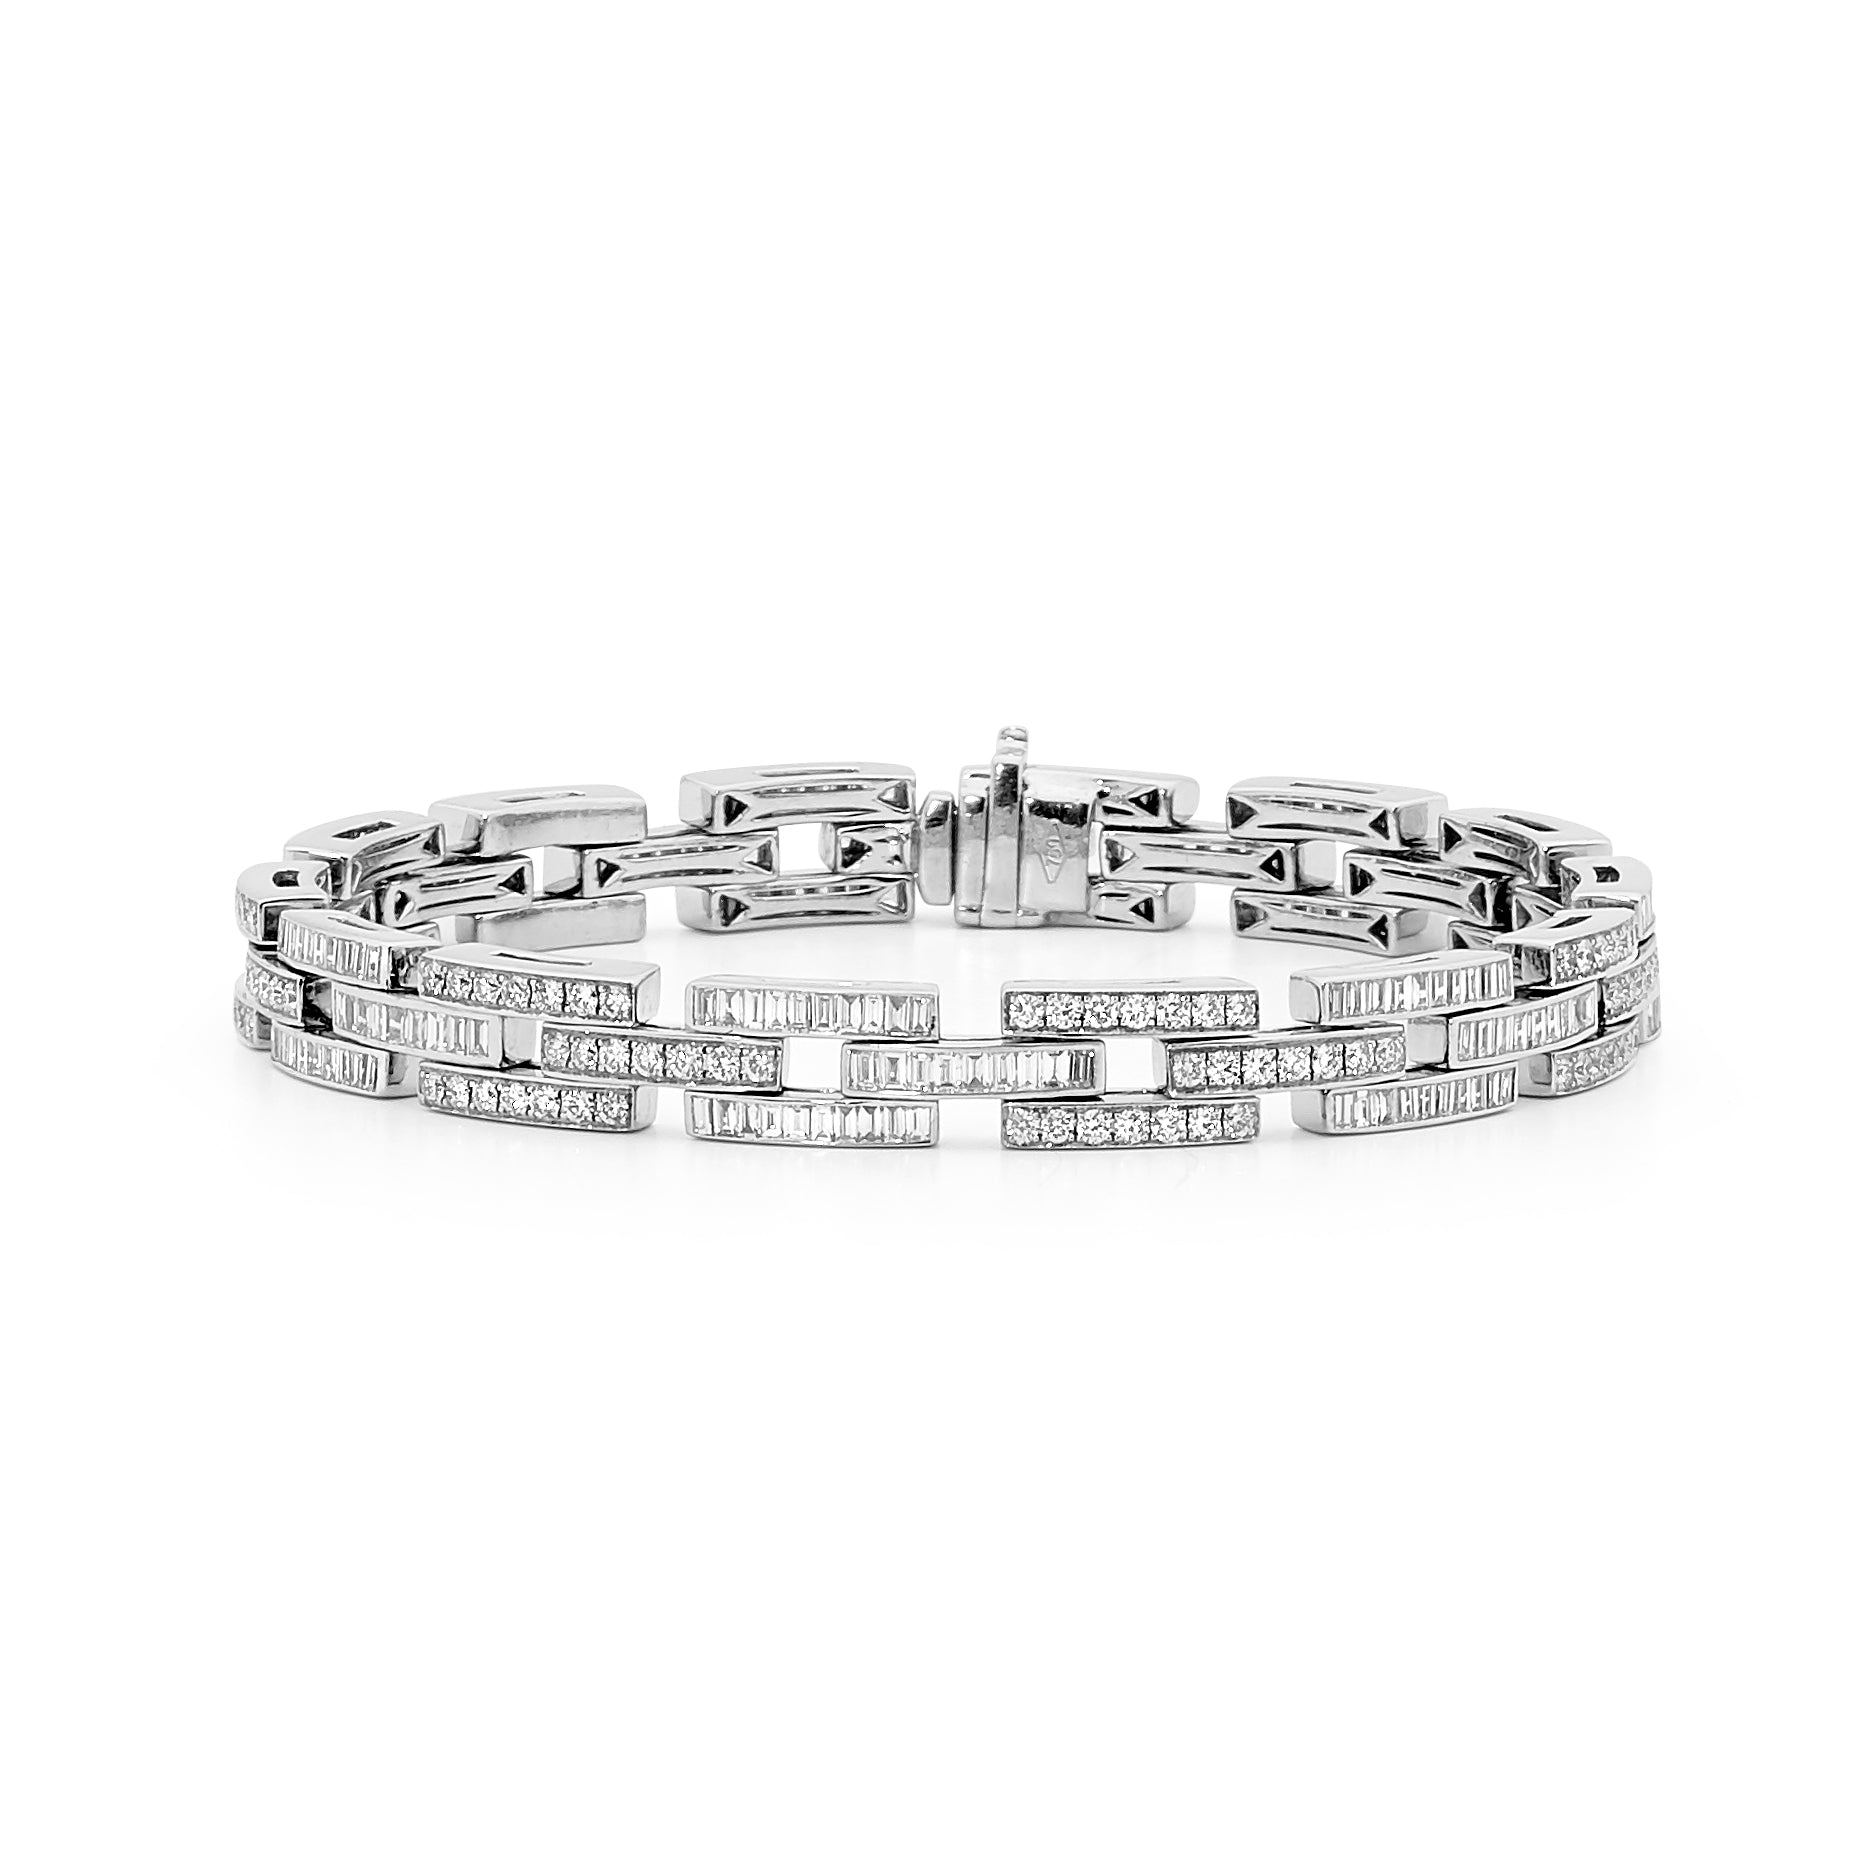 Men's Diamond Bracelet PRICE USD 2,730 CALL +919879785845 or e-mail your  inquiry t… | Mens bracelet gold jewelry, Diamond bracelet design, Bracelets  gold diamond